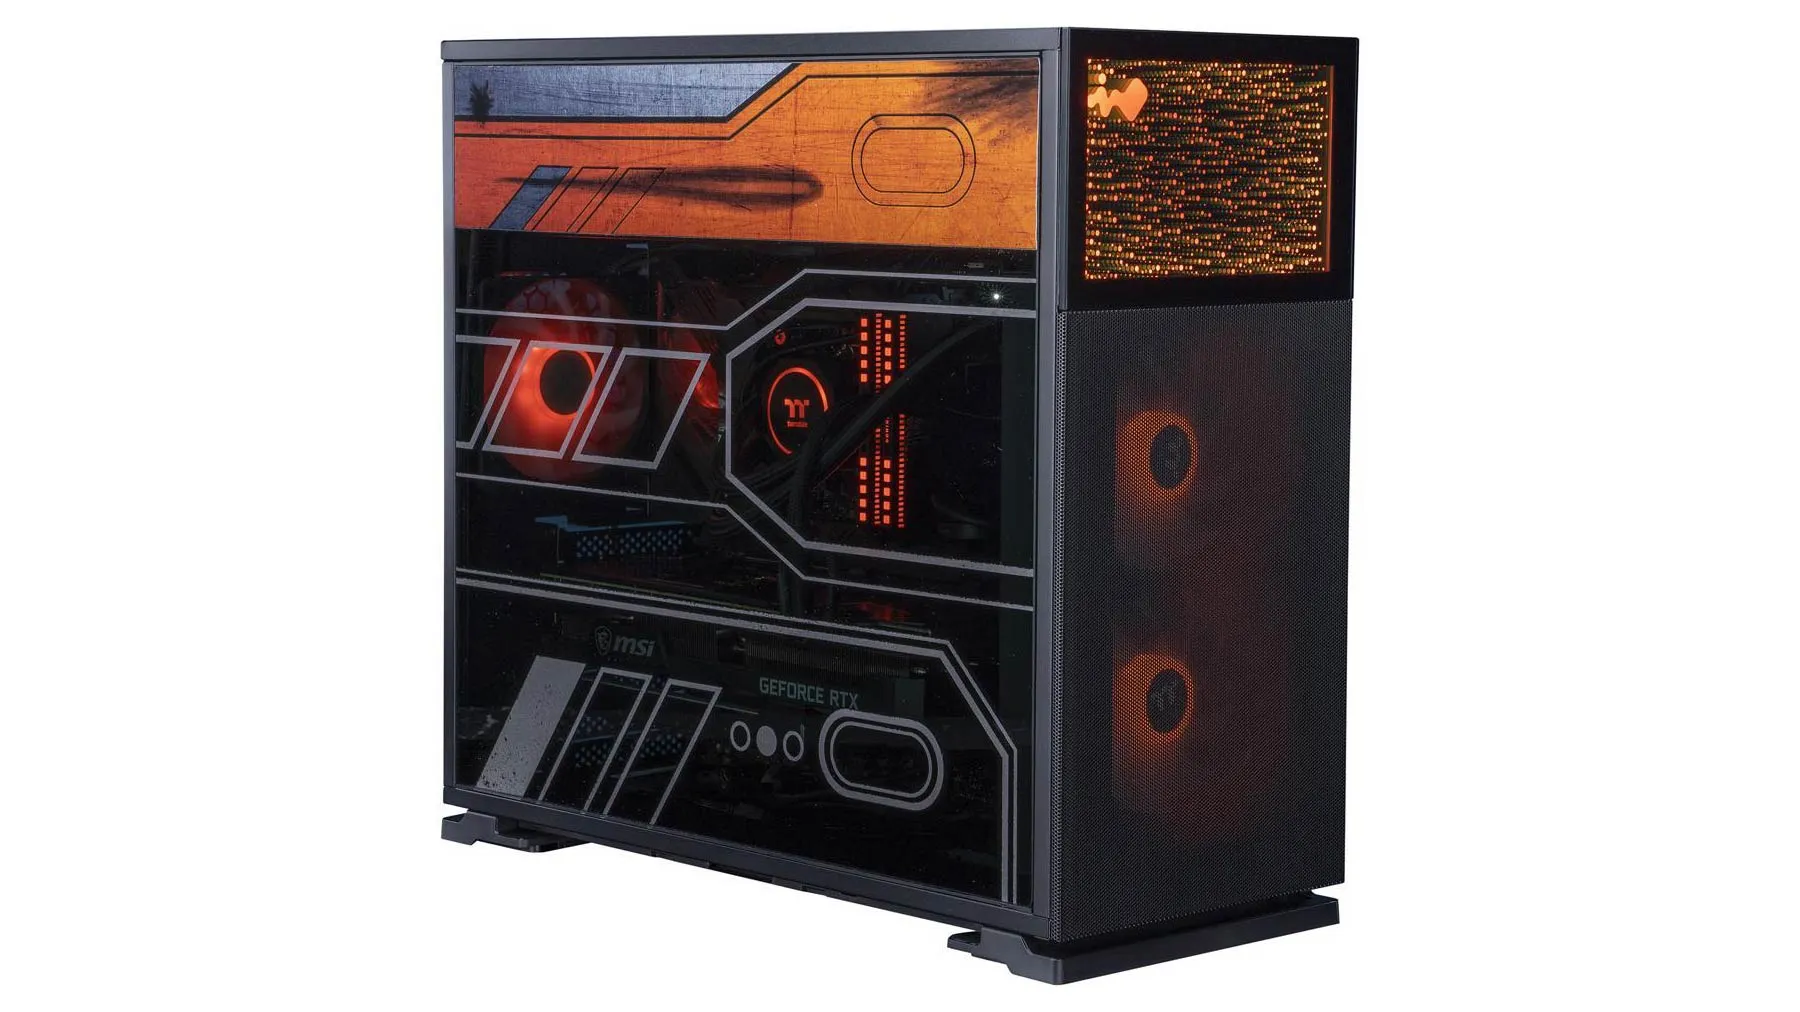 Newegg is selling an ABS Legendary May the 4th Gaming PC